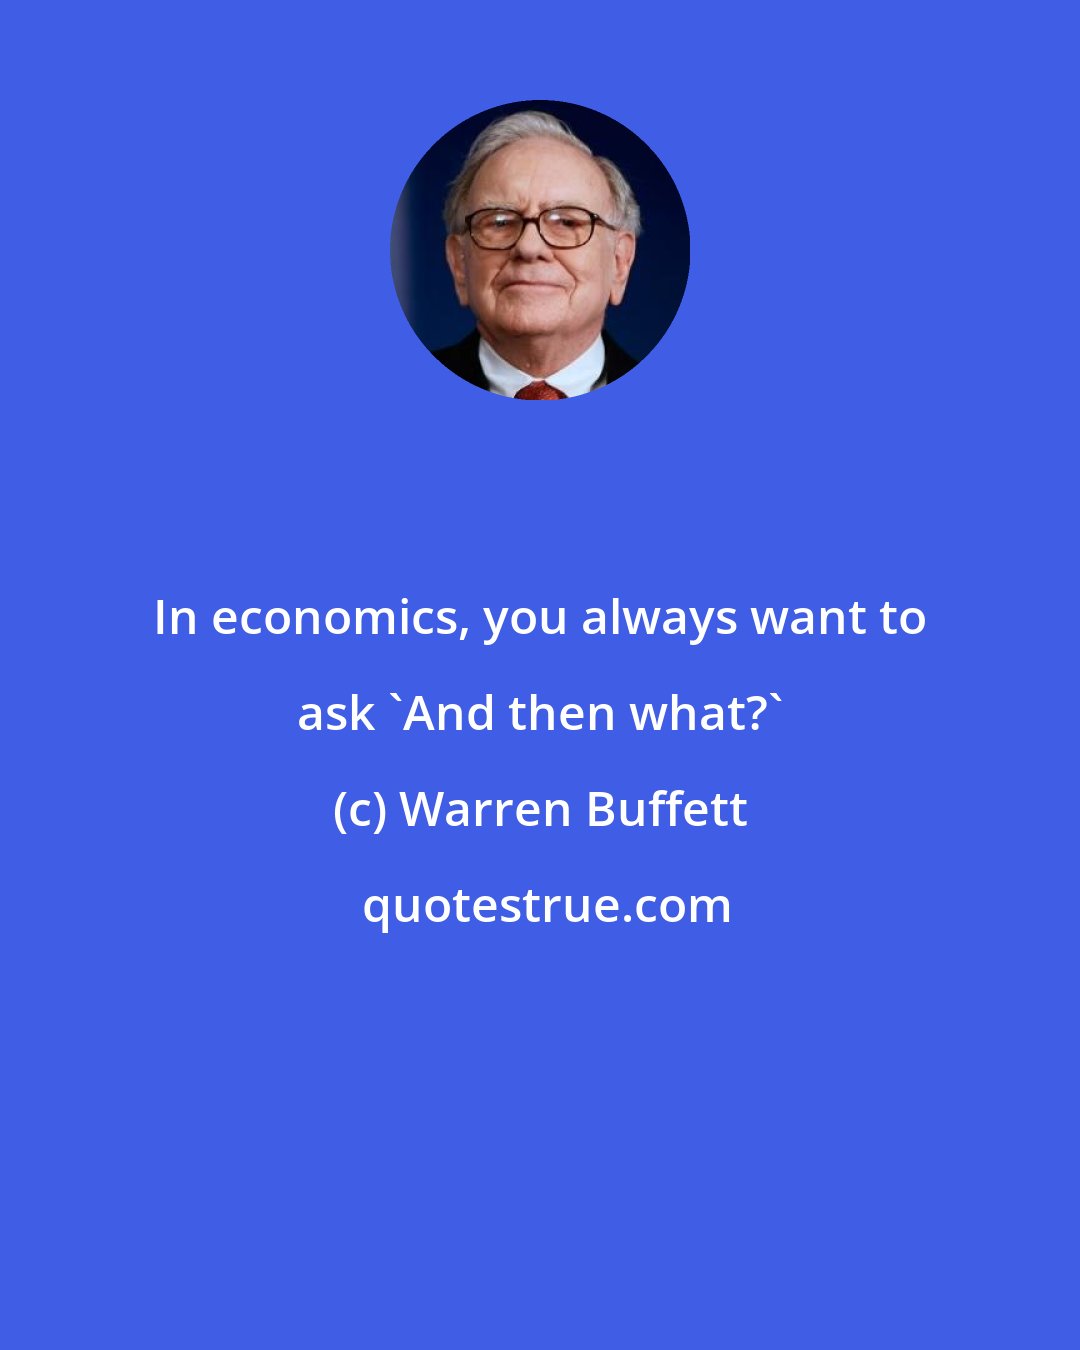 Warren Buffett: In economics, you always want to ask 'And then what?'